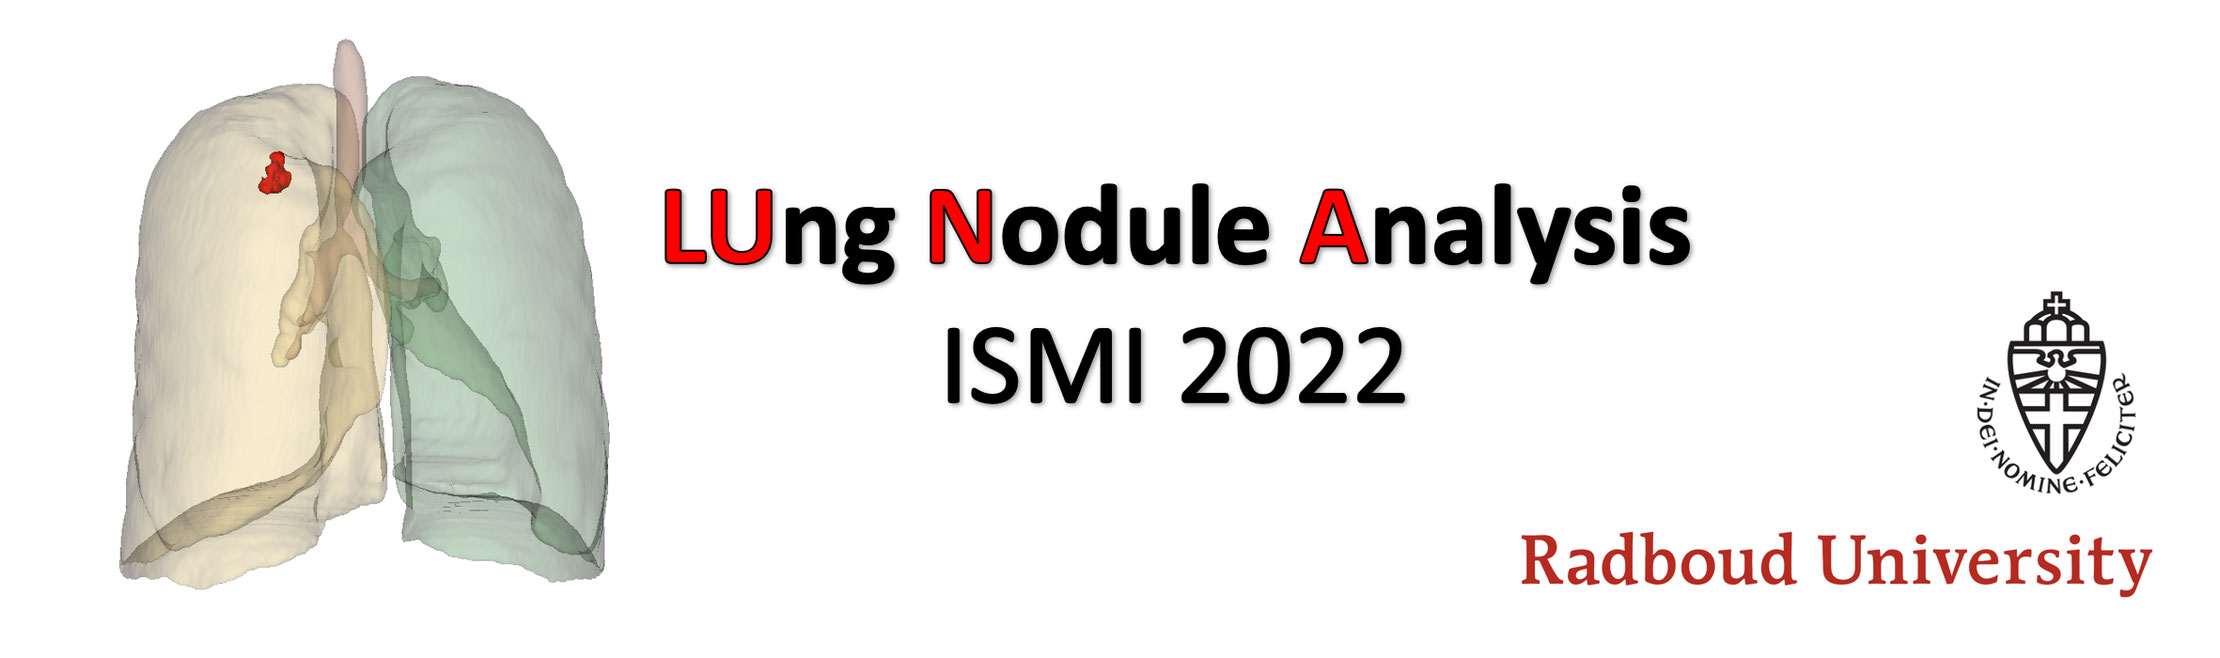 Lung Nodule Analysis 2022 - Educational challenge Banner